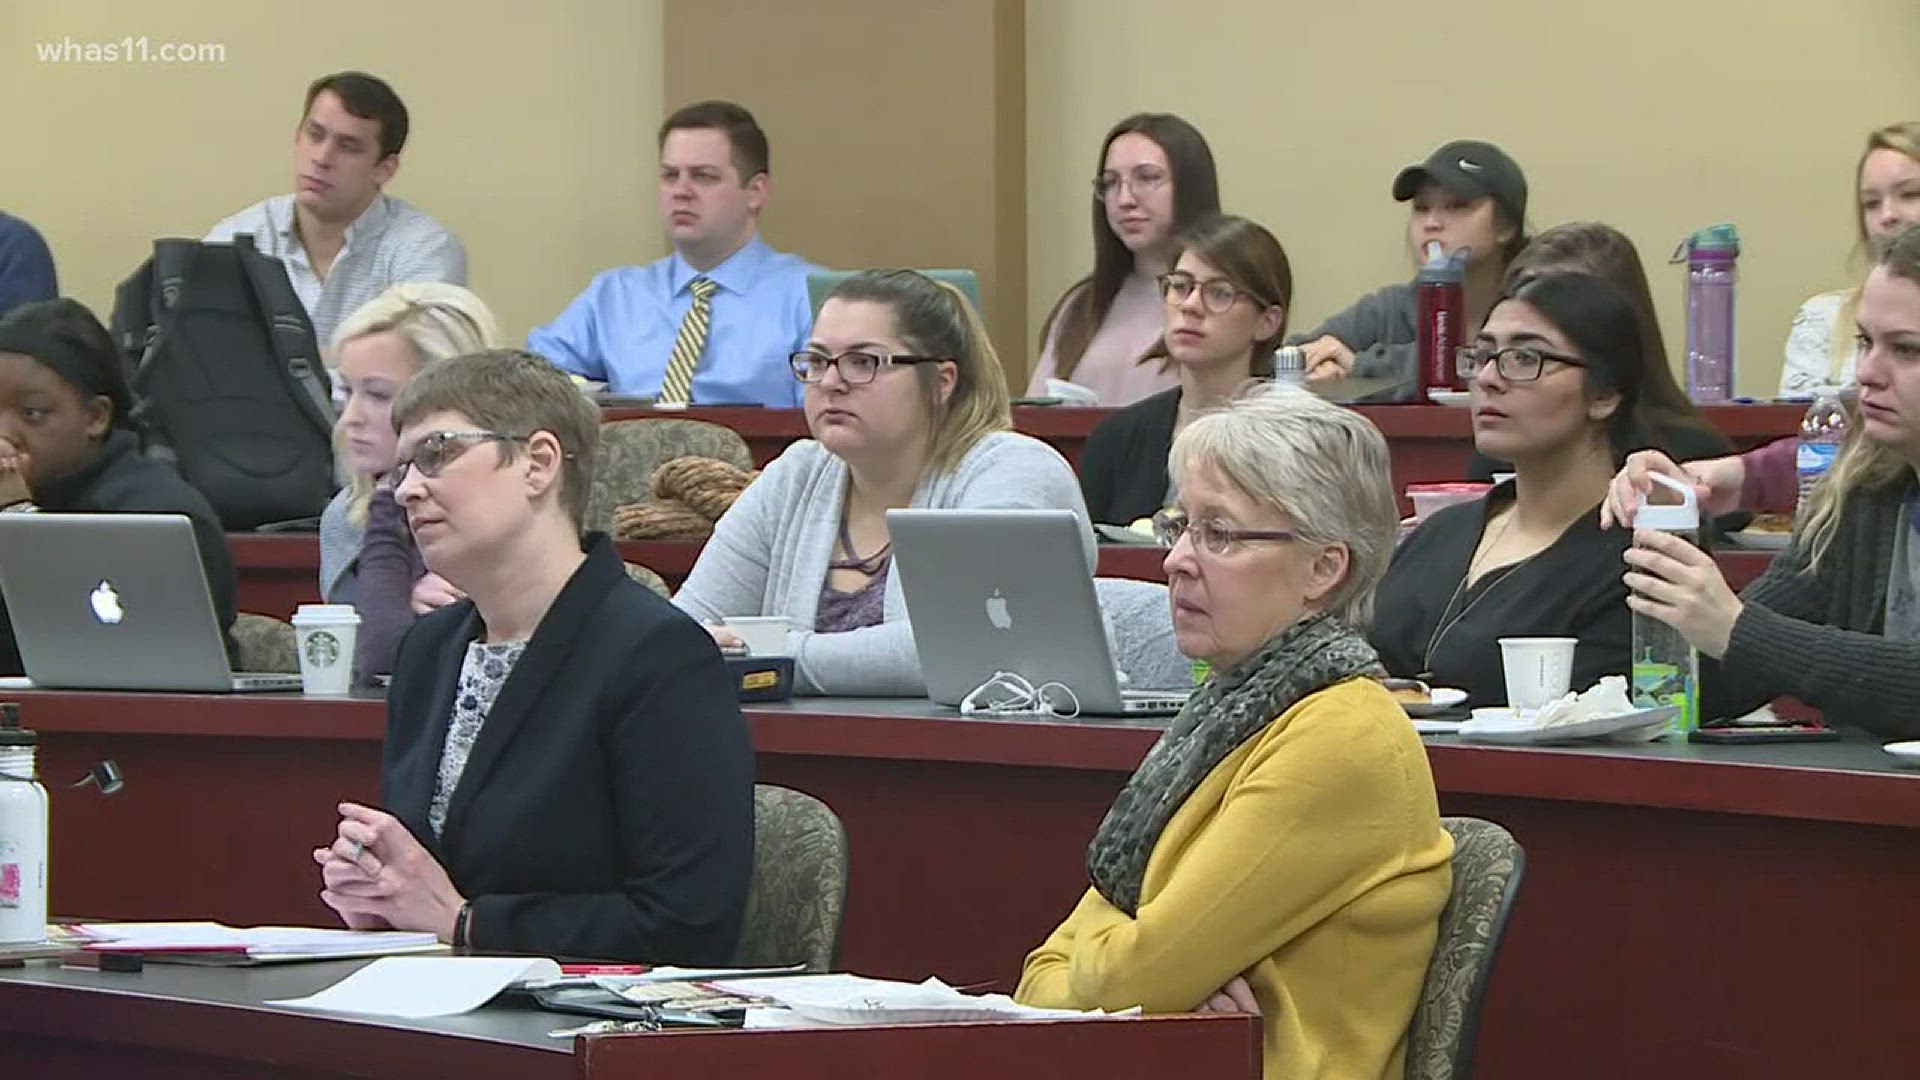 The symposium was held Friday morning at UofL Brandeis Law School.